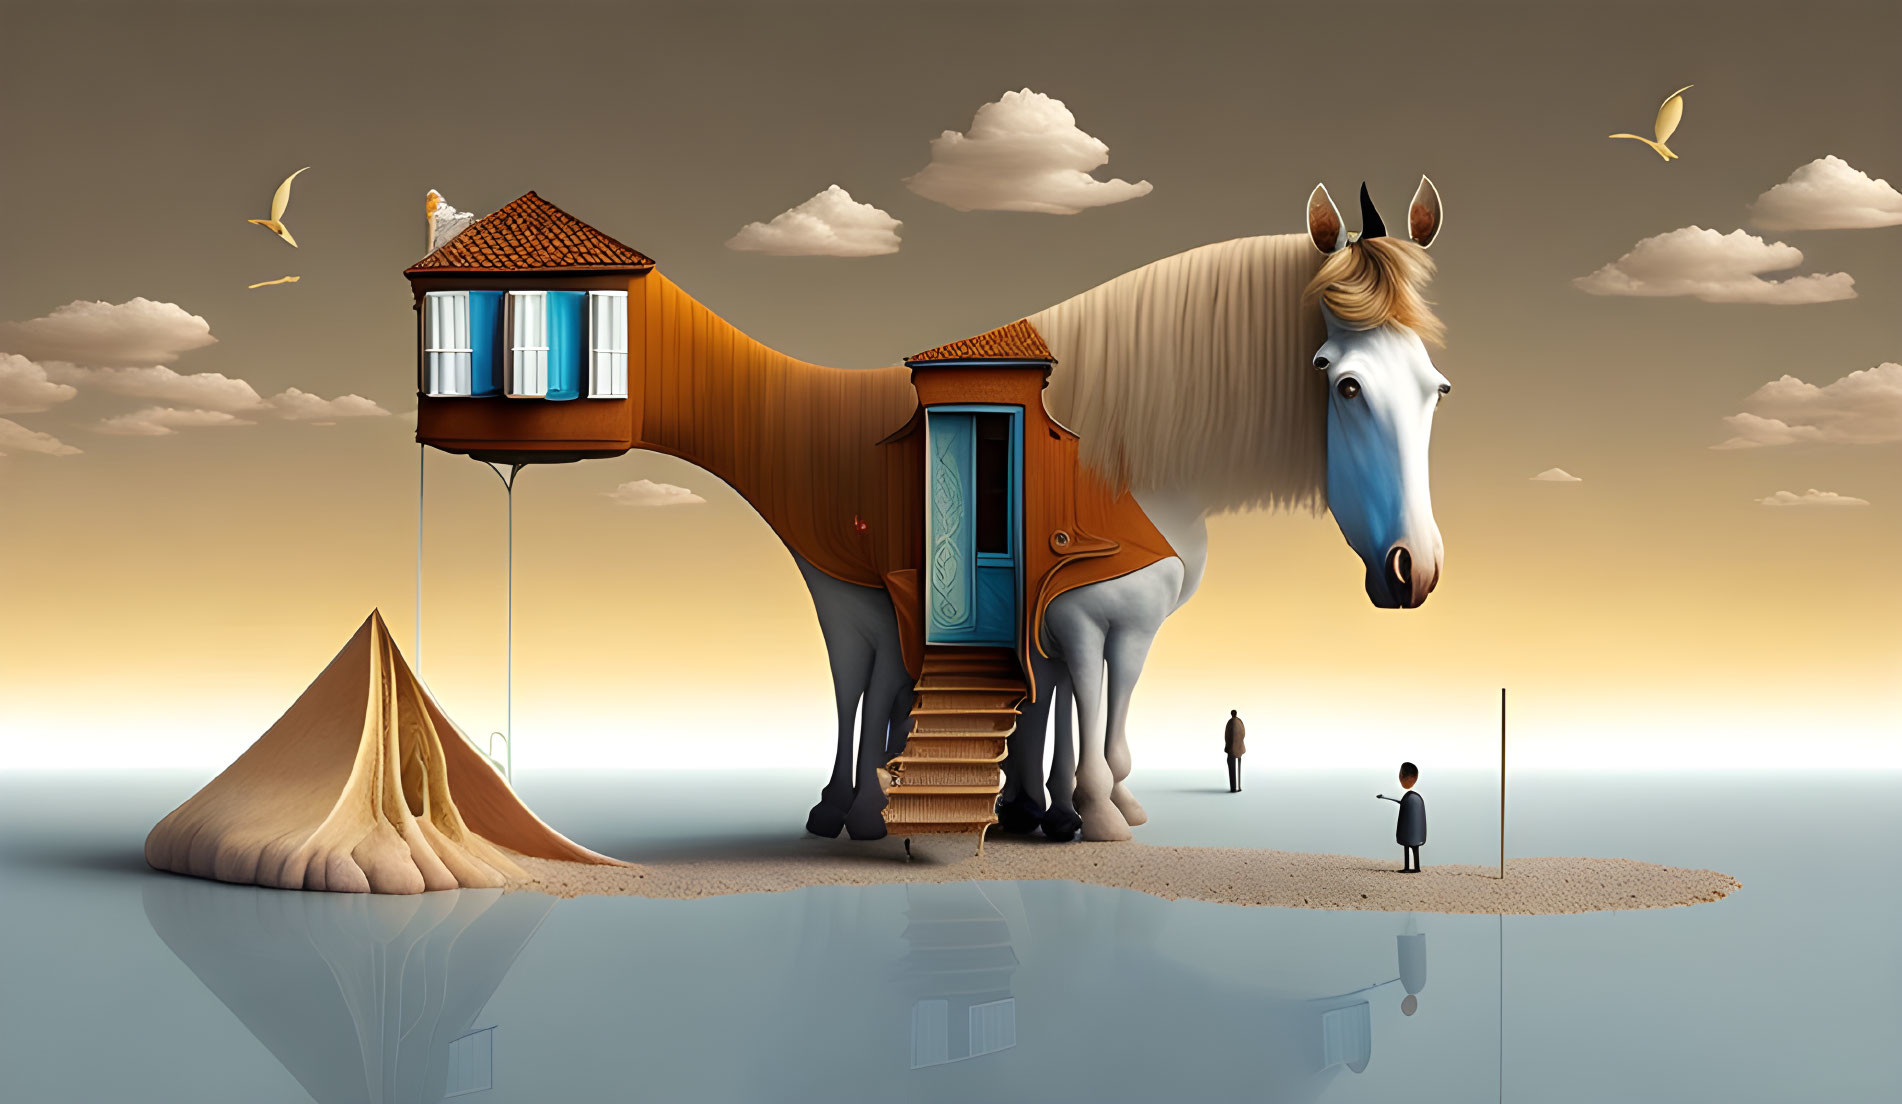 Surreal image of giant horse with architectural body on islet with human figure in dusky sky